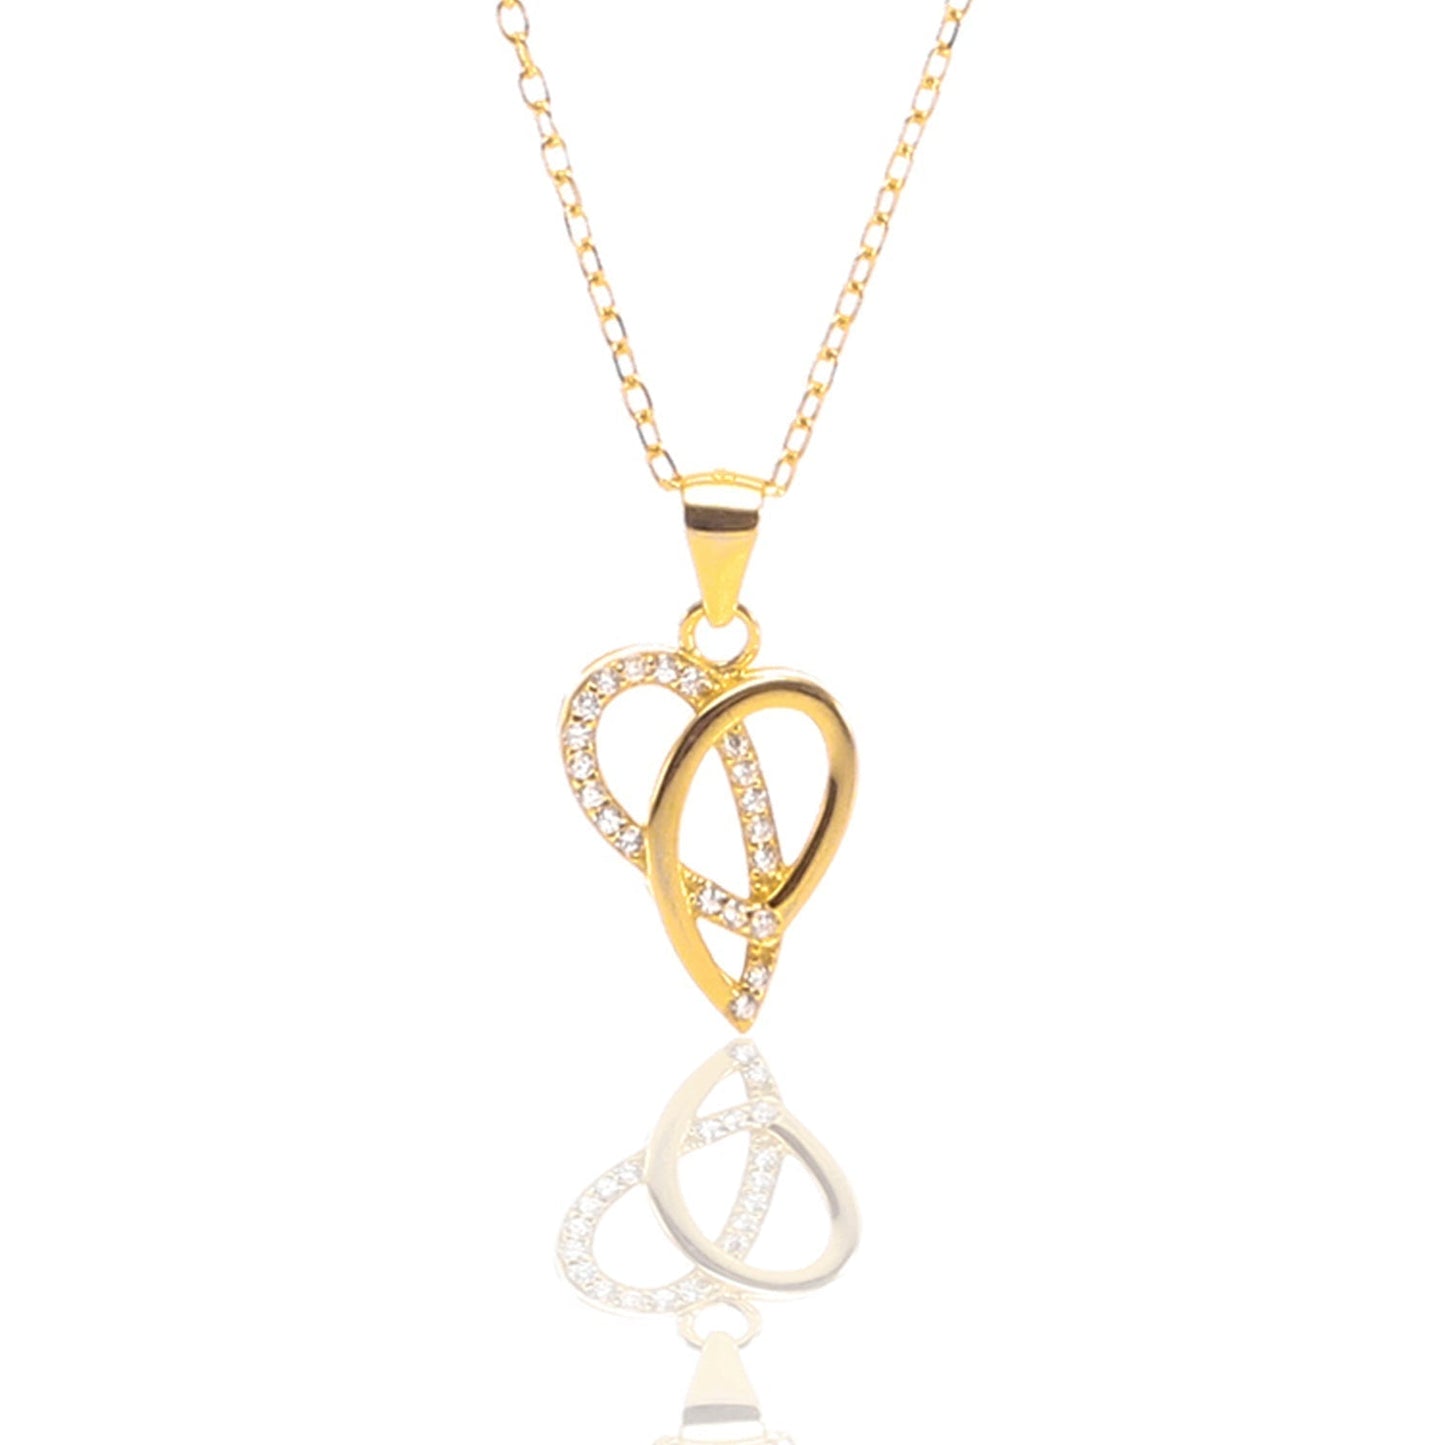 Ribbons of Love Pendant Necklace and Earrings Set - ARJW1007GD ARCADIO